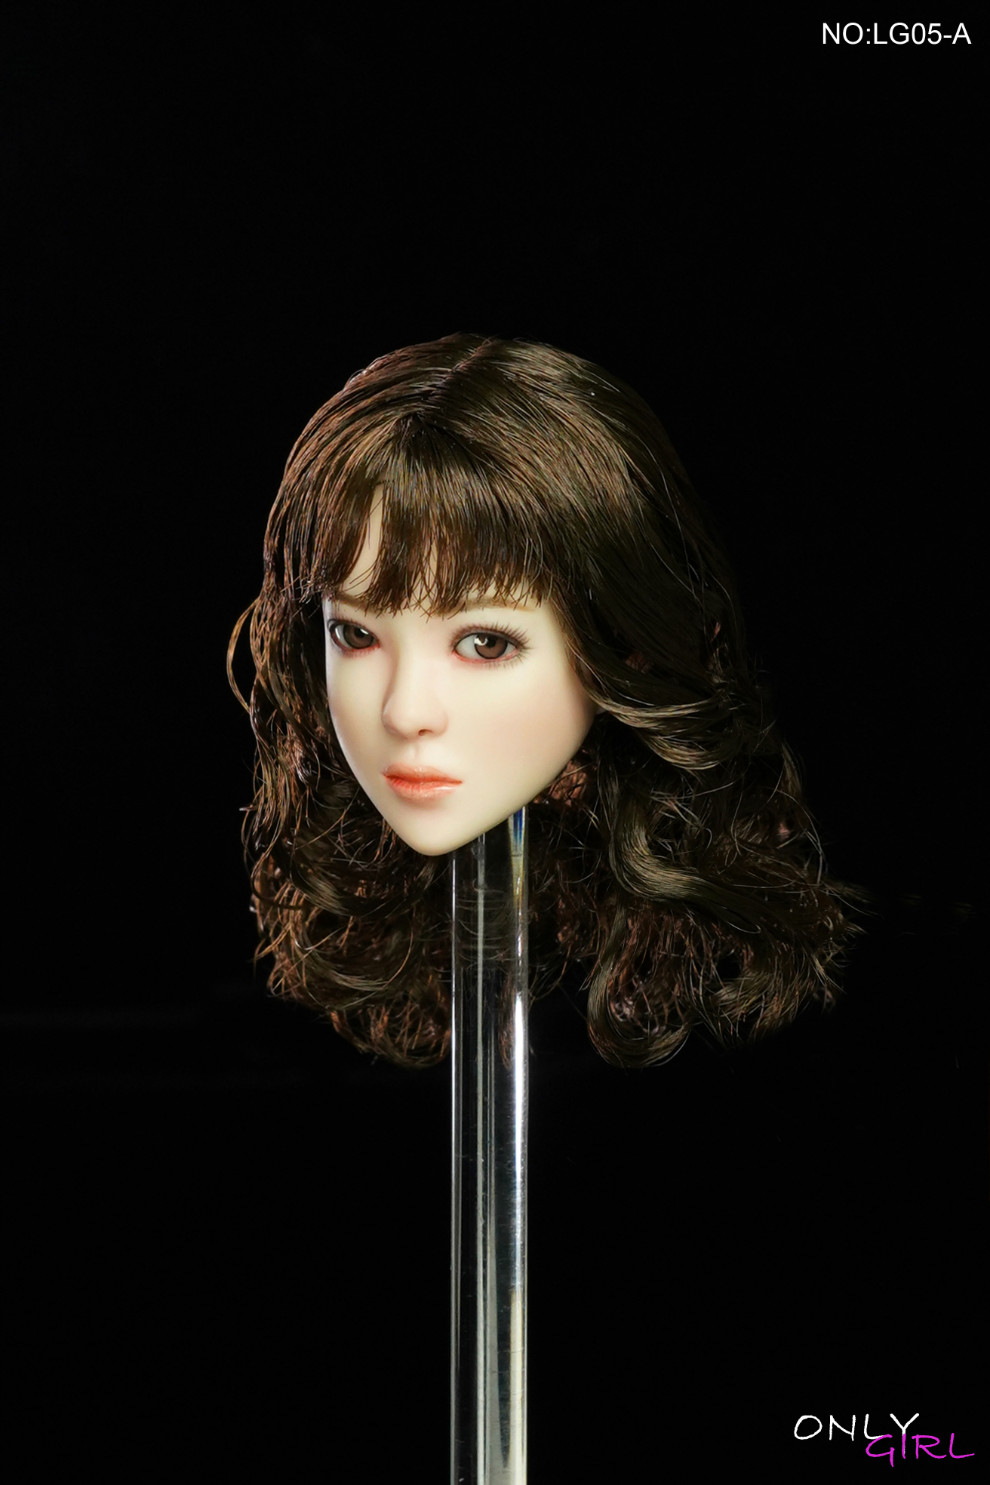 OnlyGirl - NEW PRODUCT: ONLYGIRL: 1/6 LG05 movable eye female head carving - ABC three models 4196